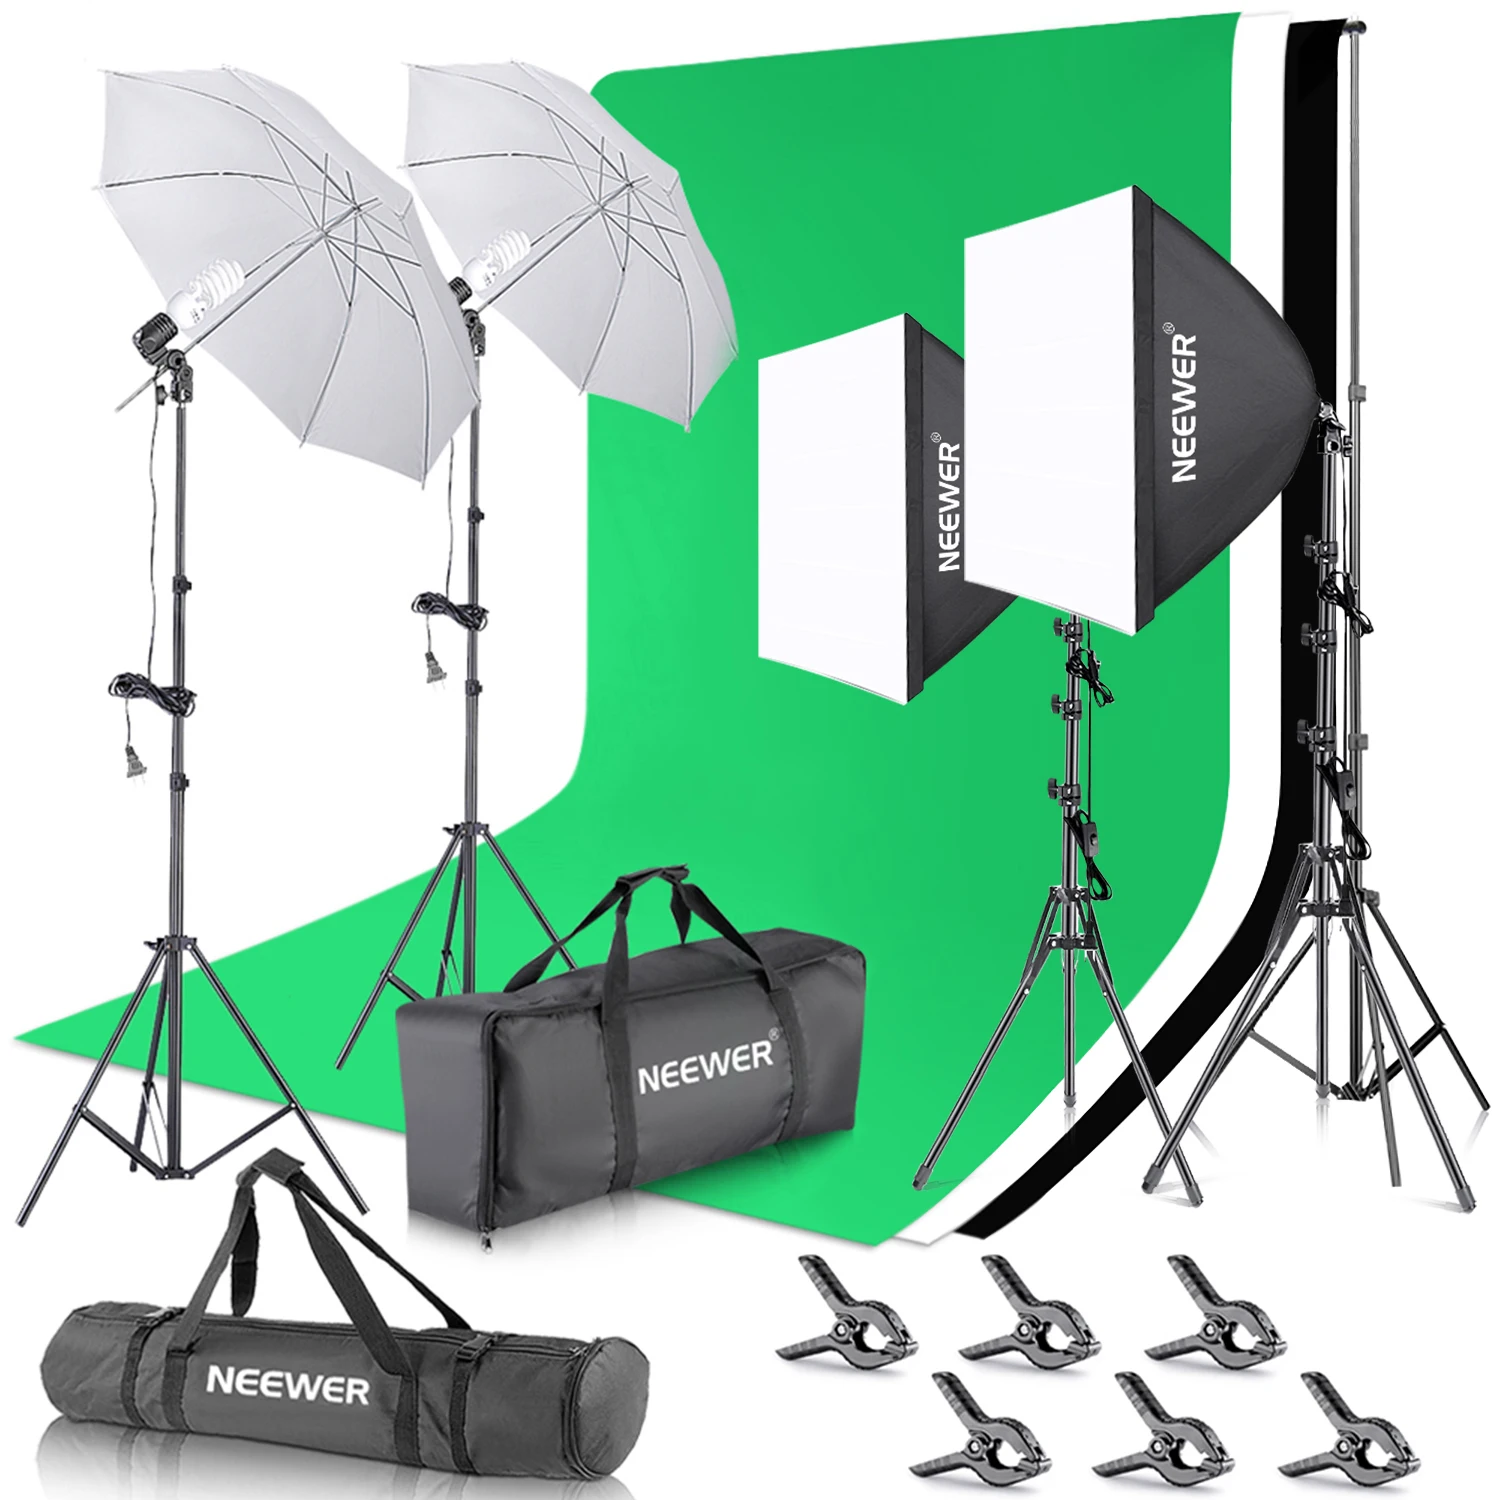 

Neewer 2.6M X 3M/8.5ft X 10ft Background Support System And 800W 5500K Umbrellas Softbox Continuous Lighting Kit